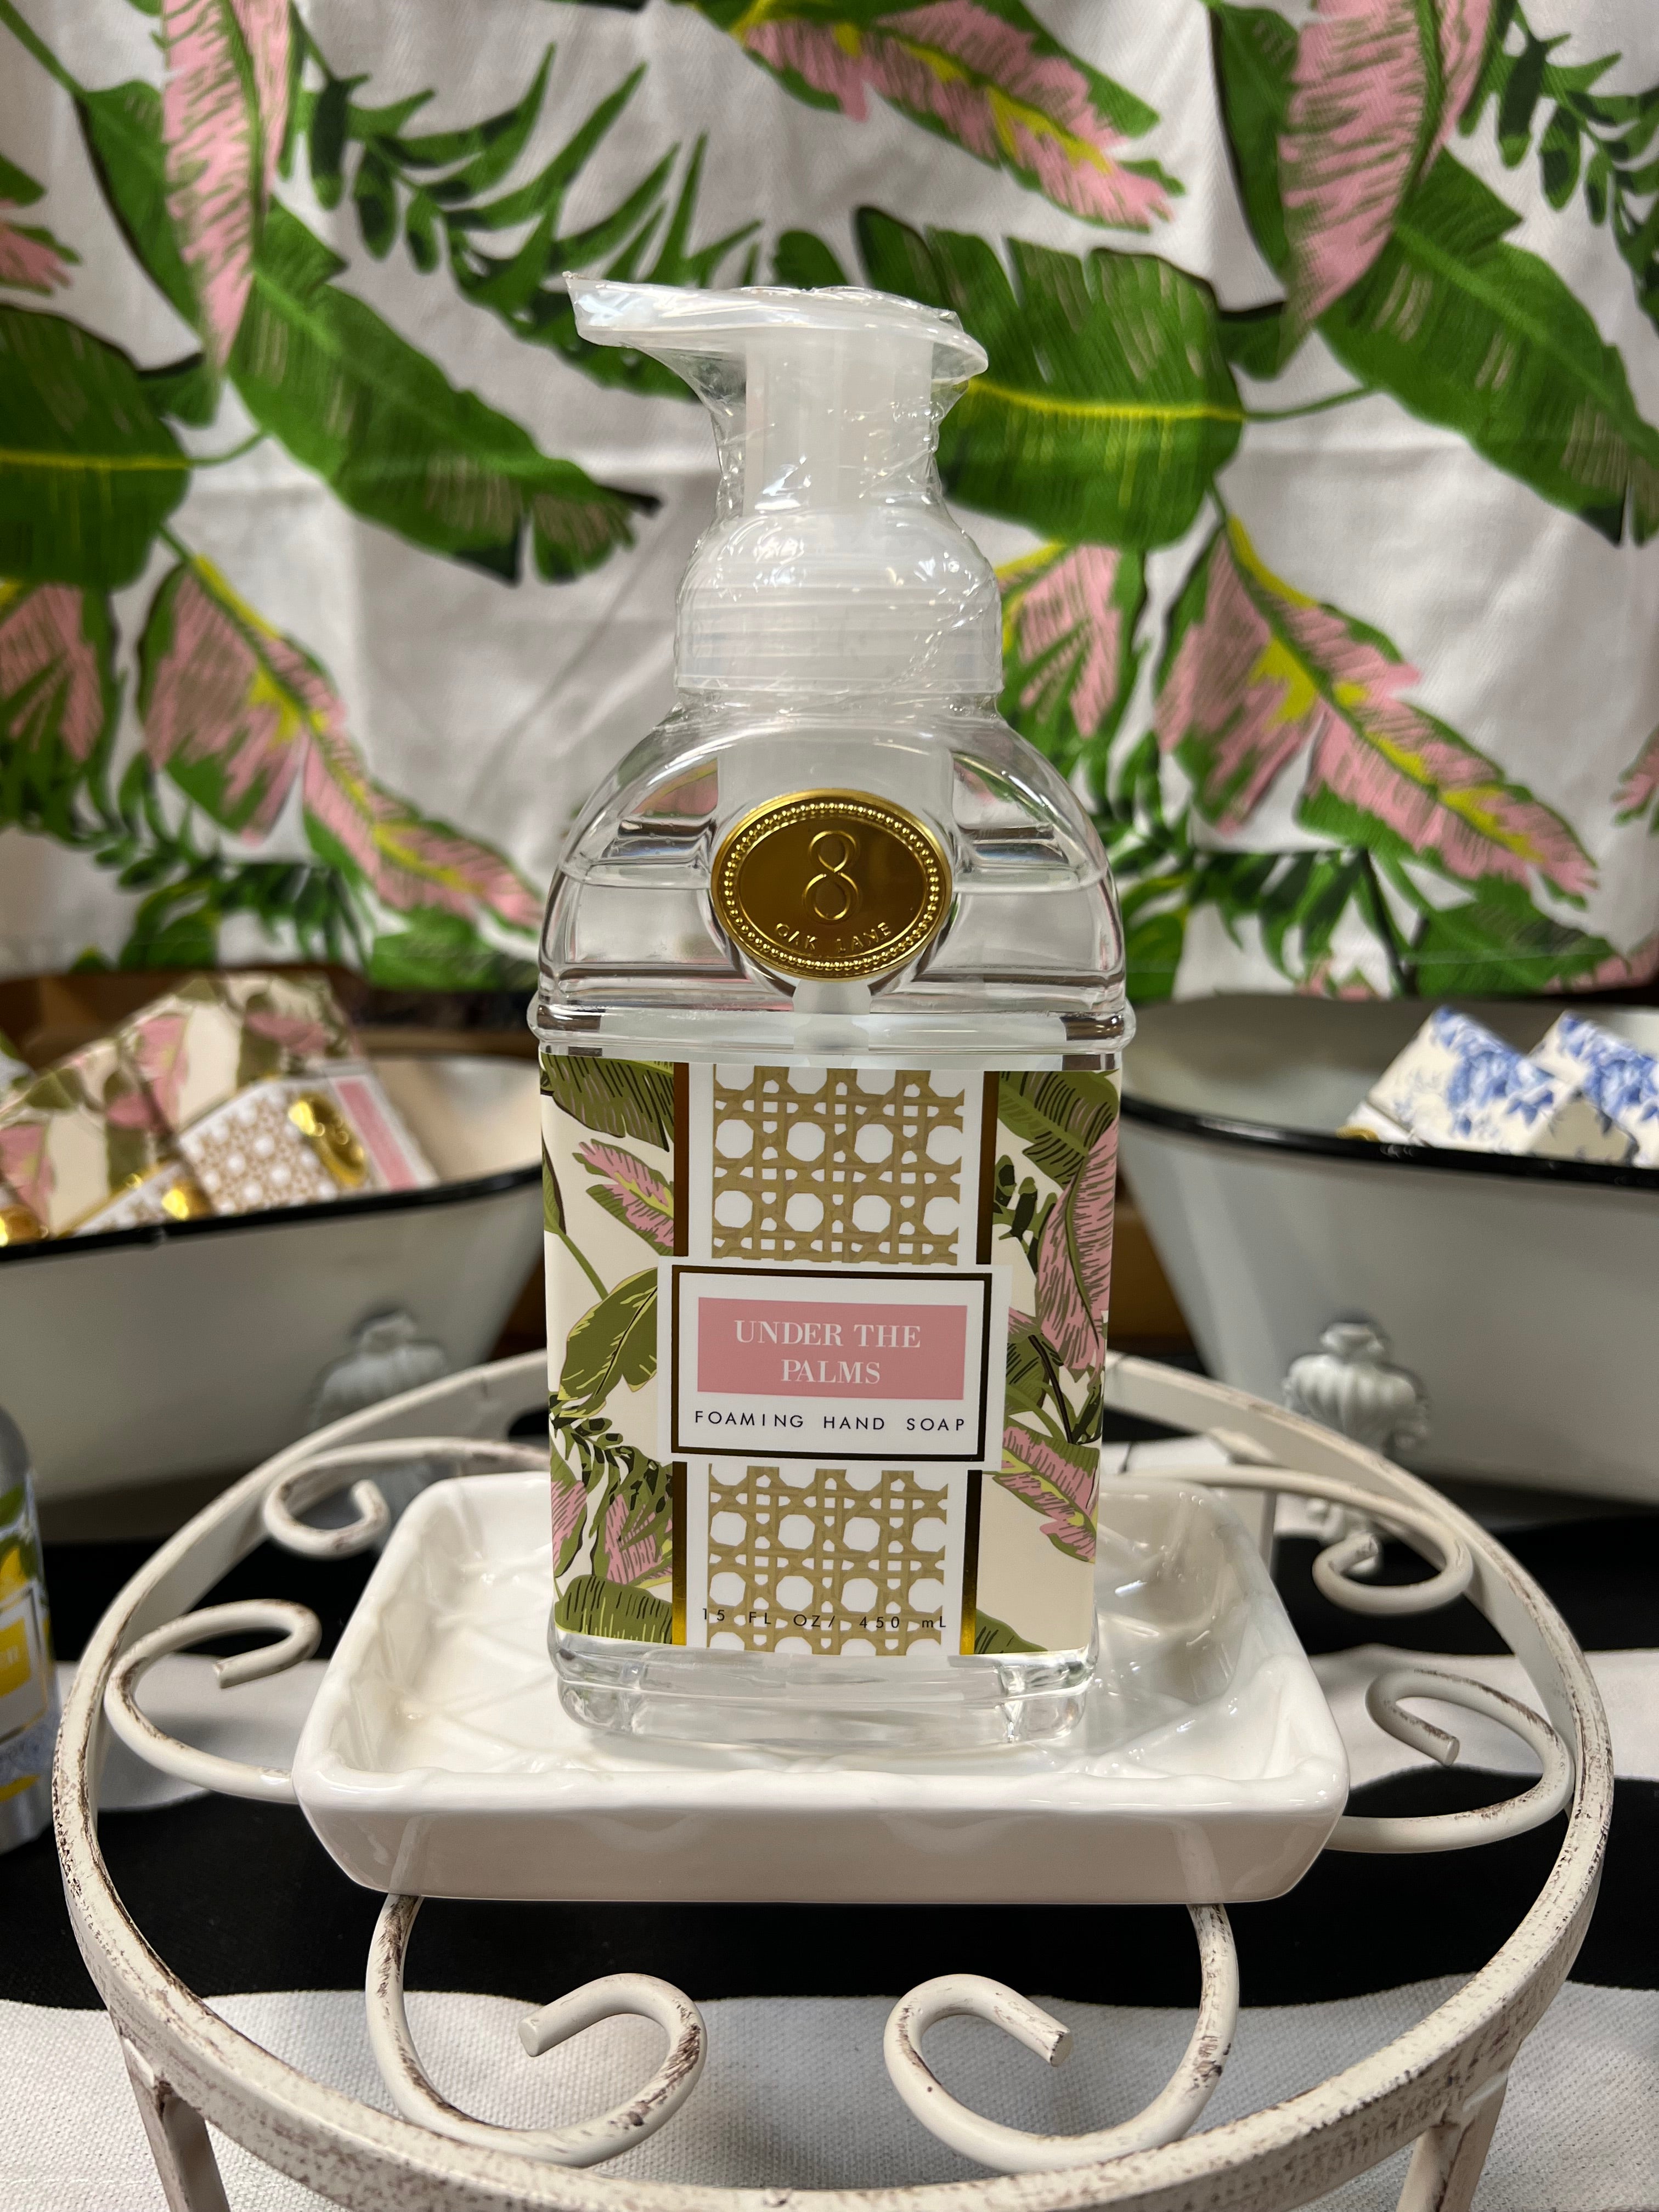 Foaming Hand Soap - Under the Palms